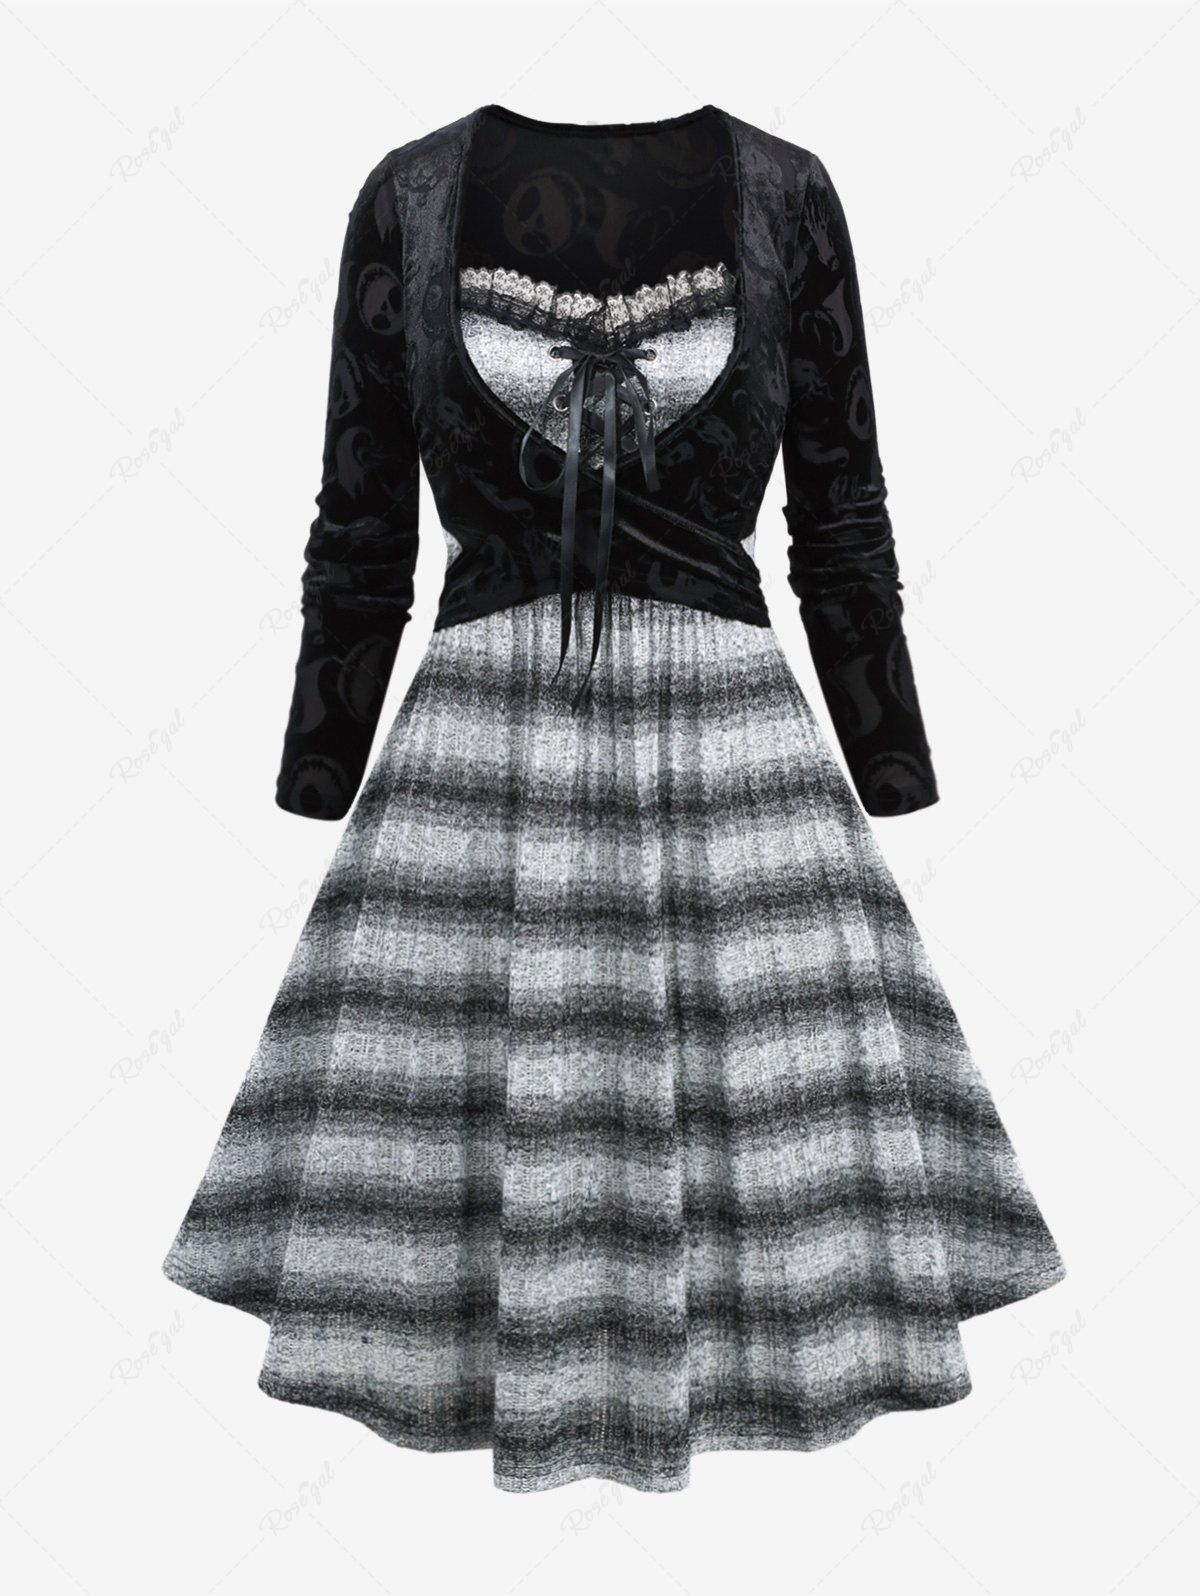 Hot Plus Size Skull Ghost Flocking Crossover Lace-up Ruffle Lace Striped Knitted Halloween 2 in 1 Dress  